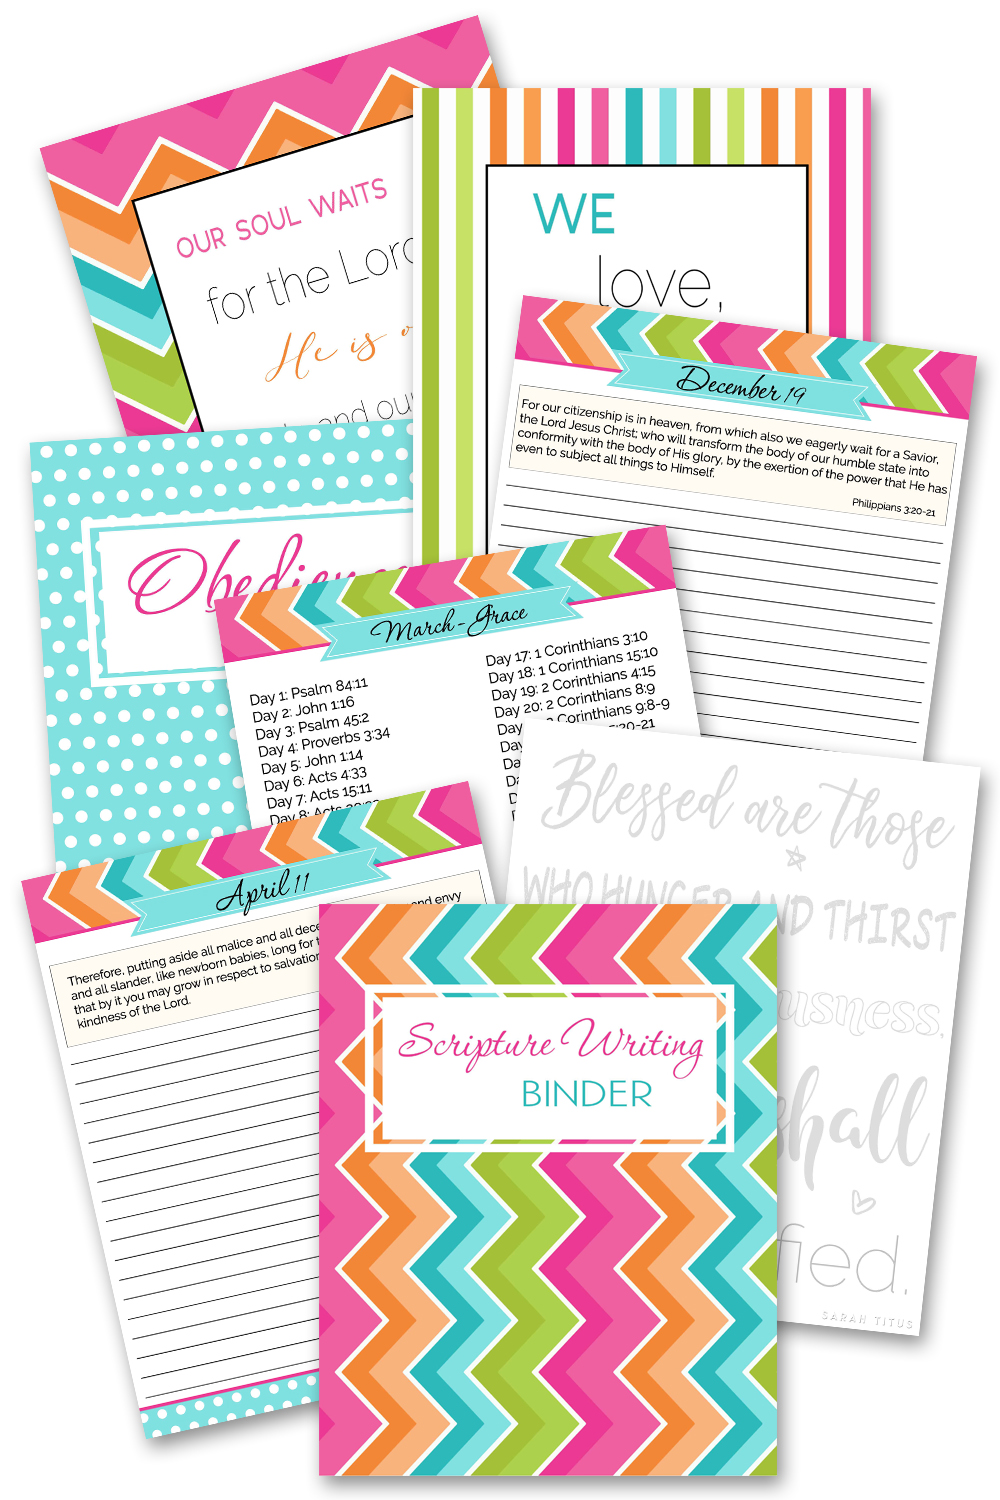 Scripture Writing Binder {415+ pages}